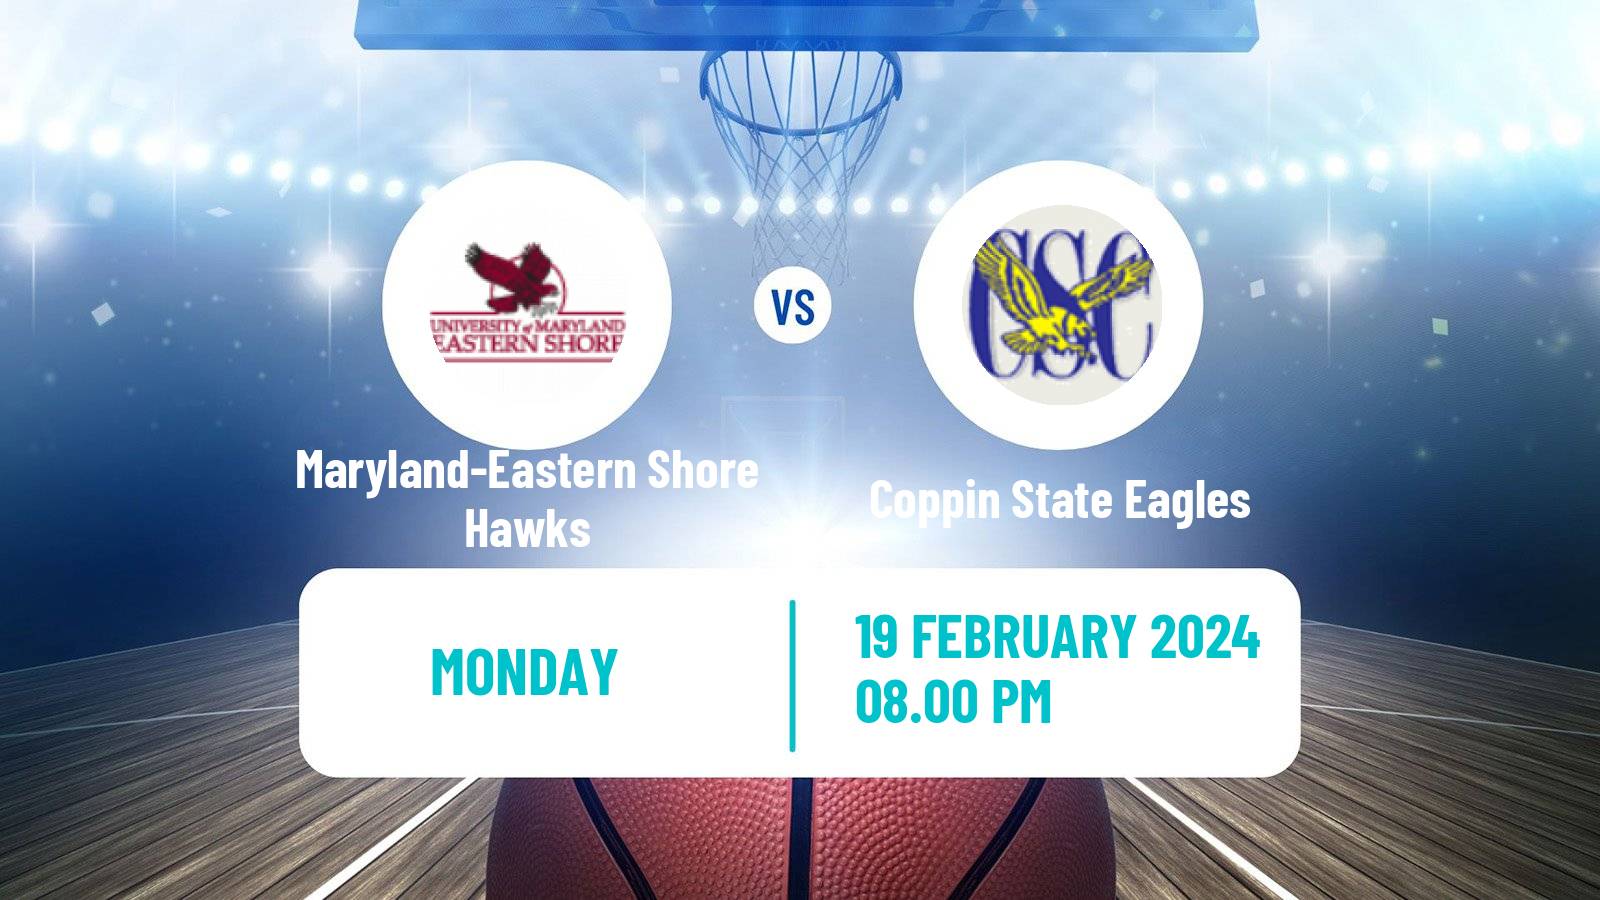 Basketball NCAA College Basketball Maryland-Eastern Shore Hawks - Coppin State Eagles